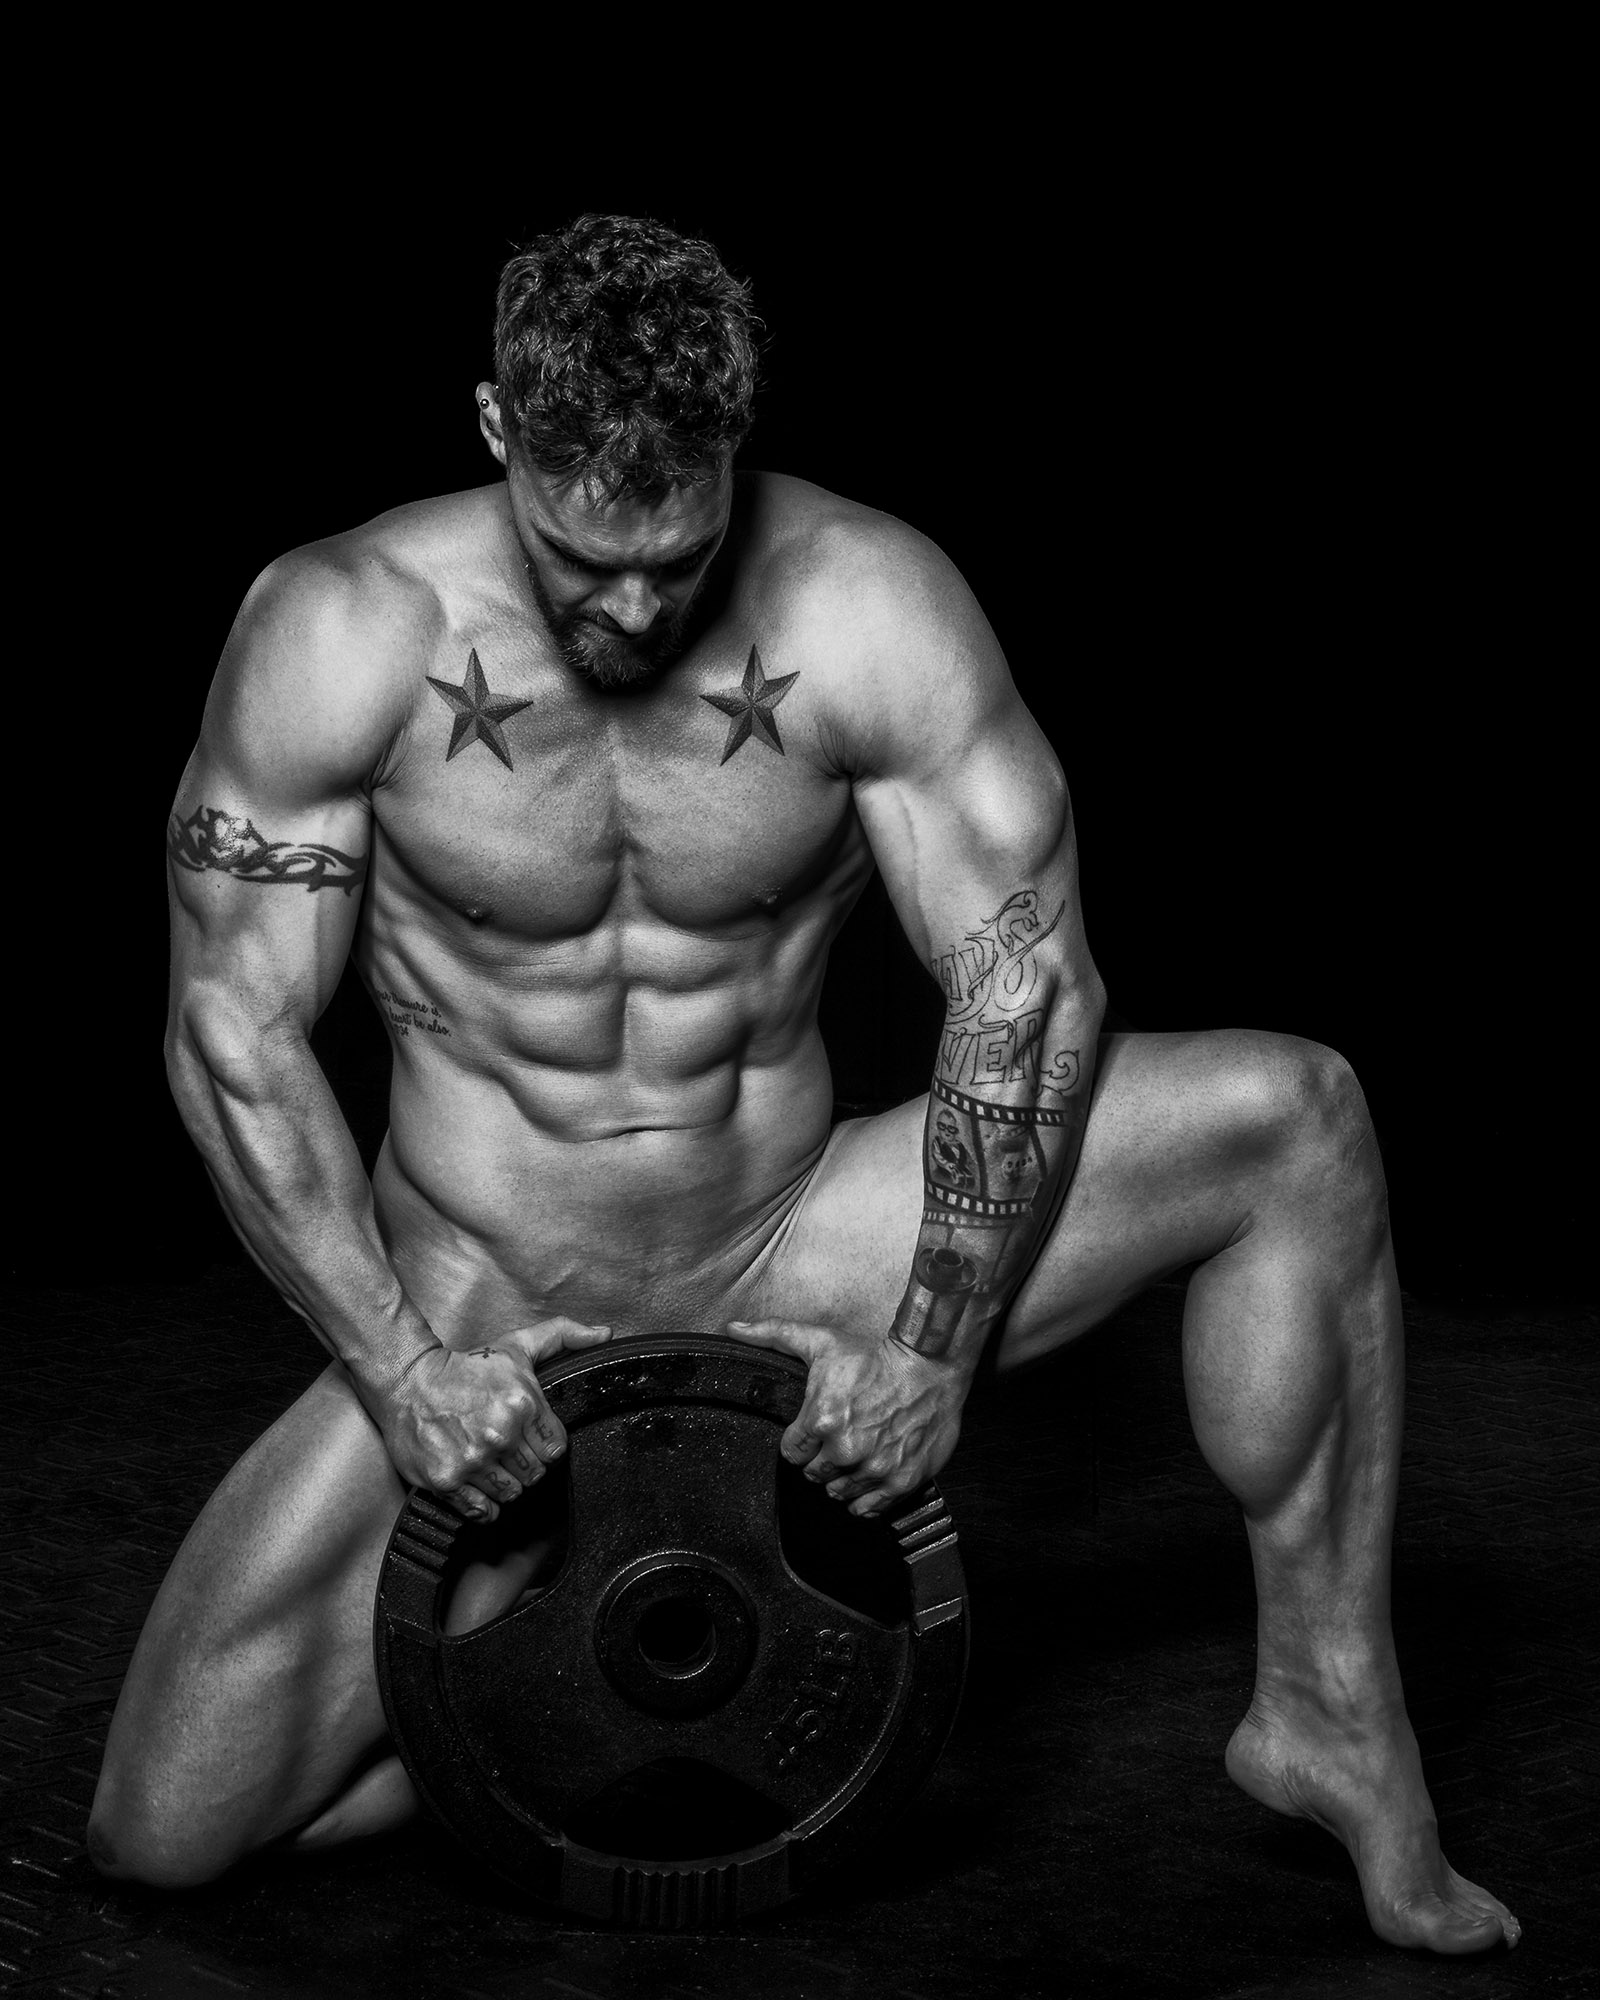 Nude male fitness pictures